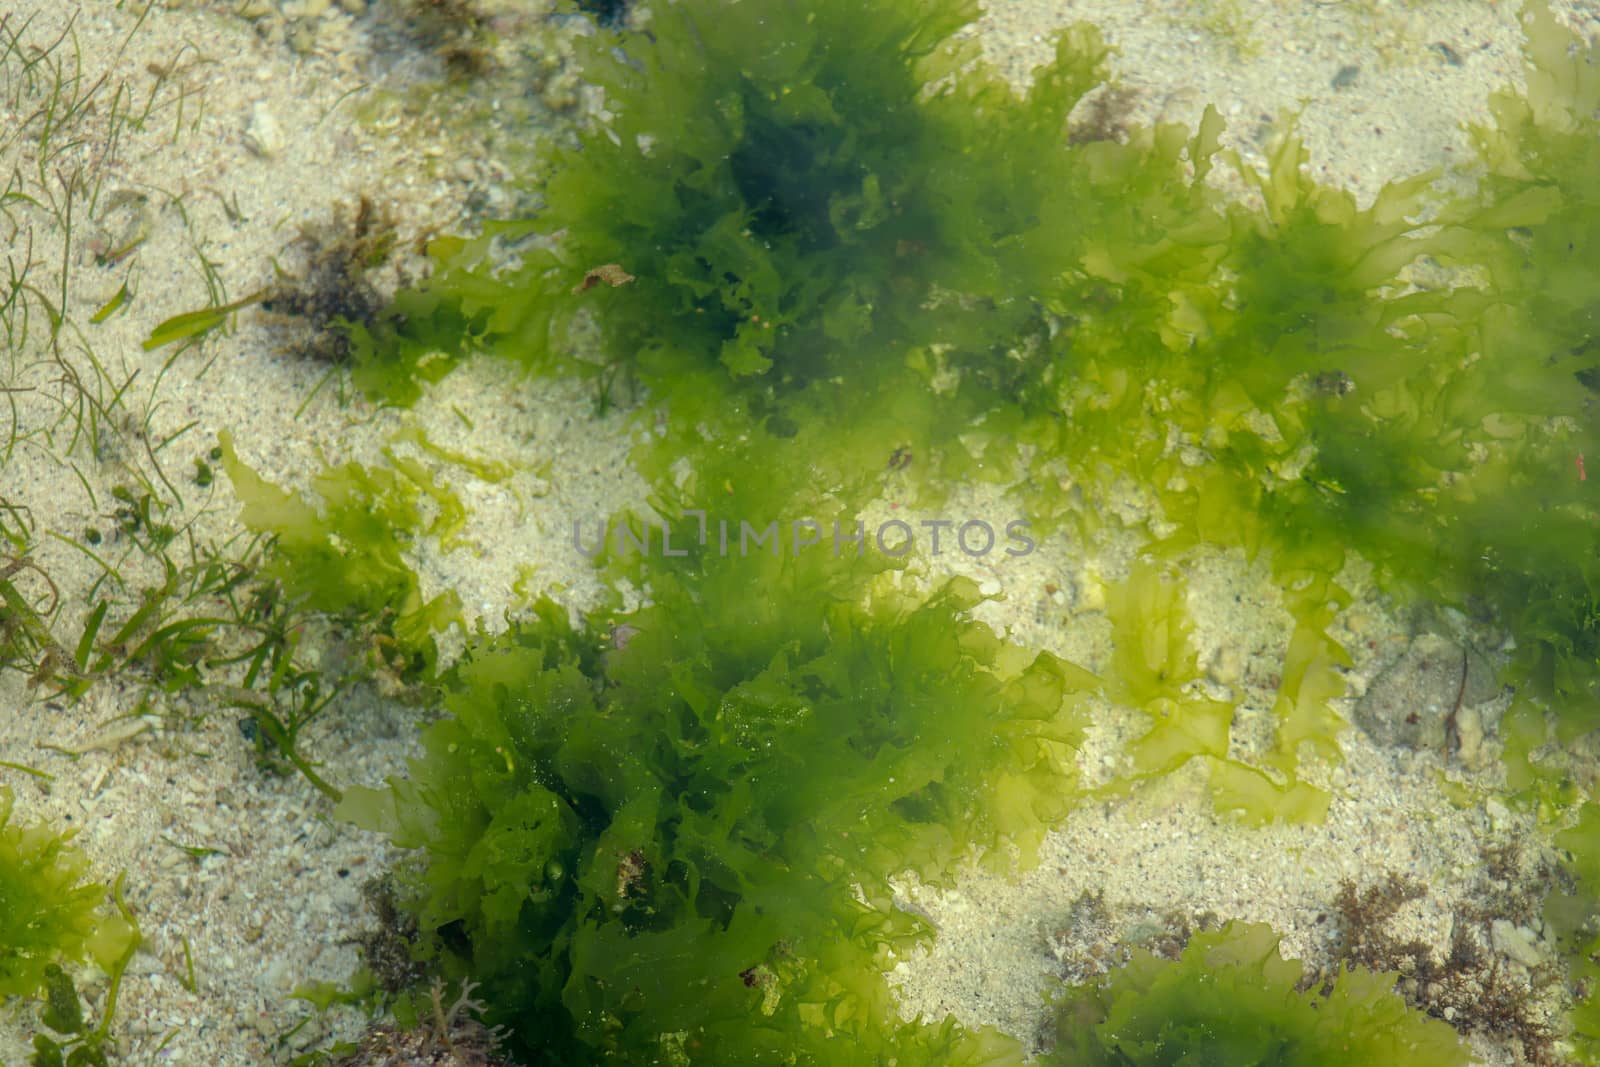 Underwater Background of sea grass in blue water. Green grass sandy bottom the clear water by Sanatana2008